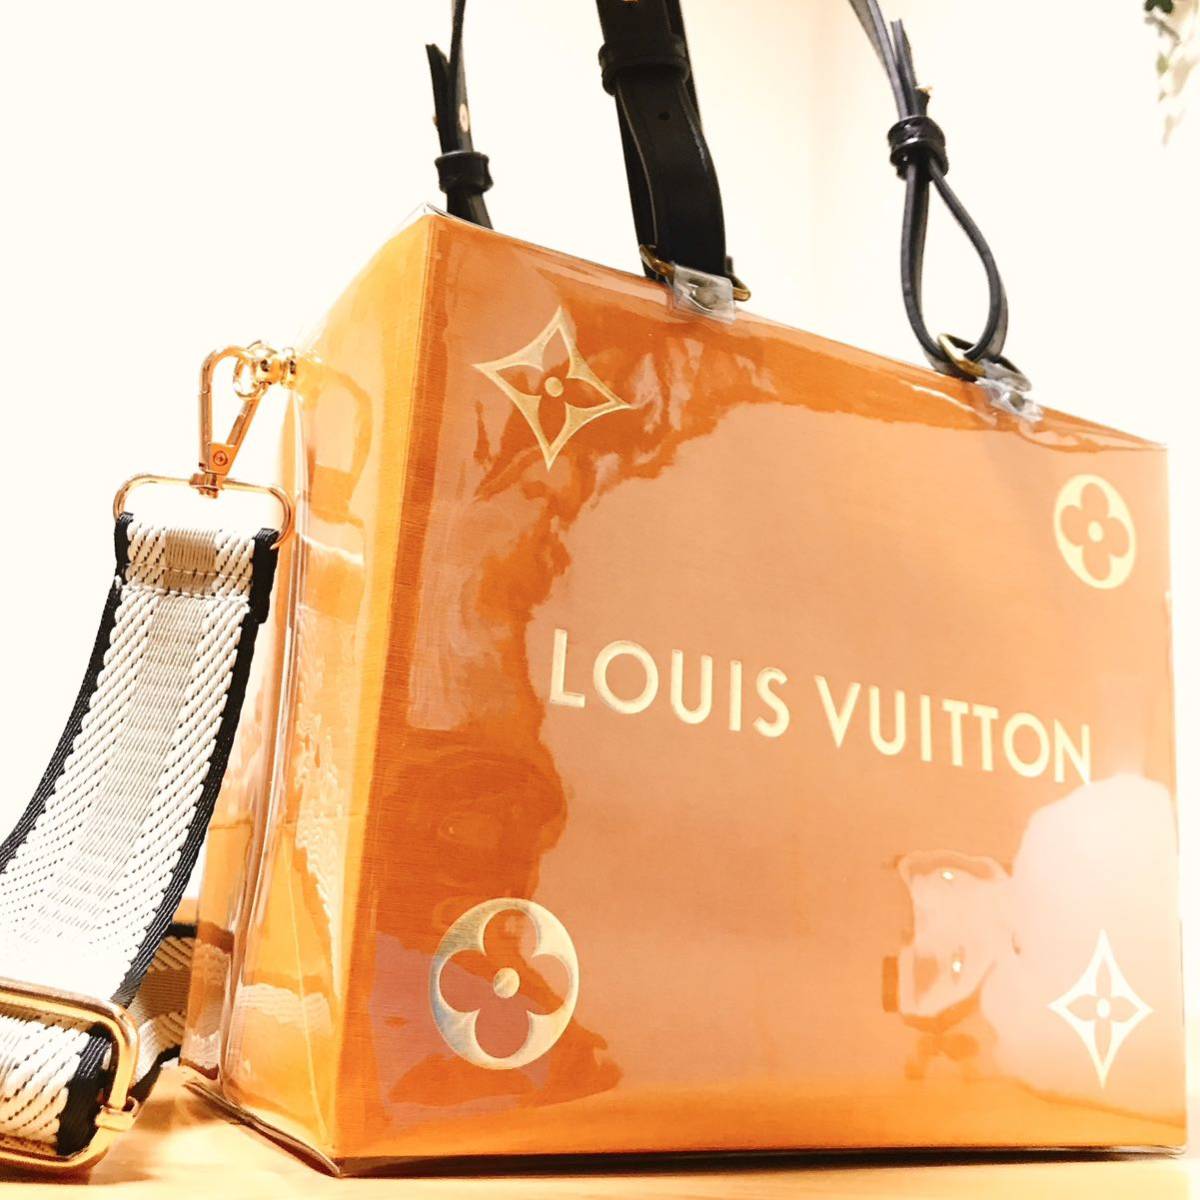 LOUIS VUITTON ルイヴィトン 限定 紙袋 ＆ クリアバッグ /【Buyee